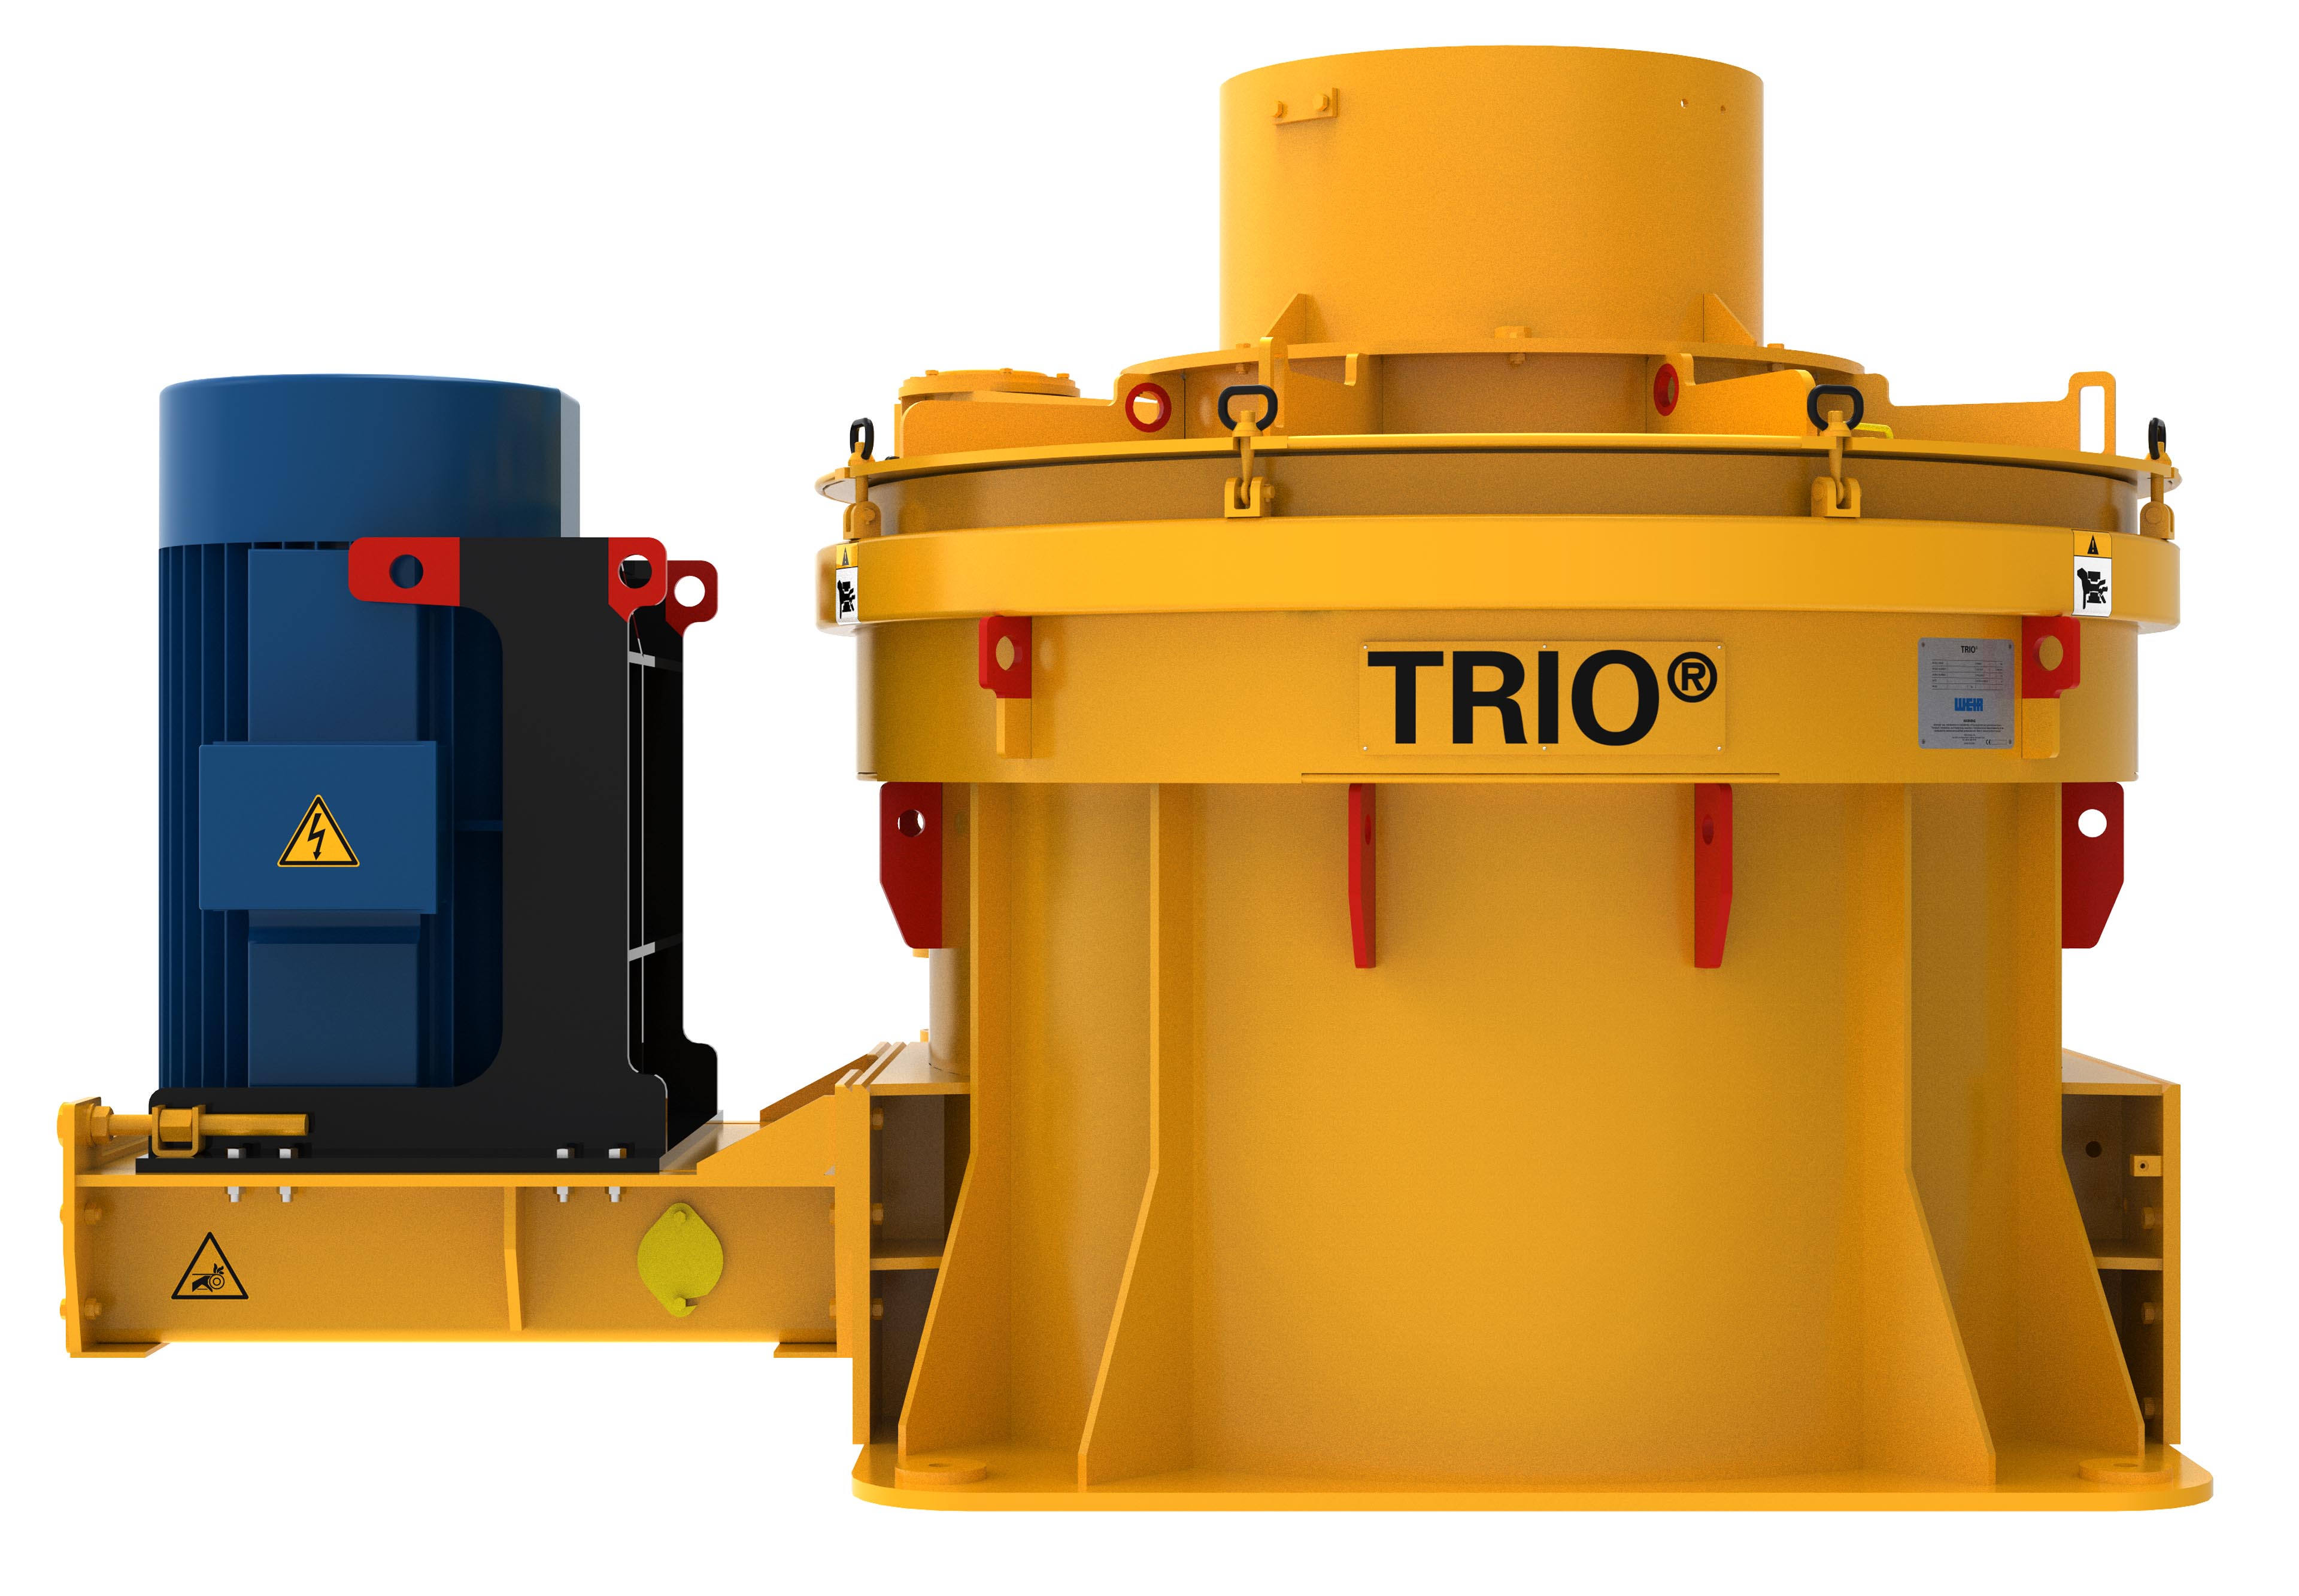 Our Range of Trio® Vertical Shaft Impactor Crushers